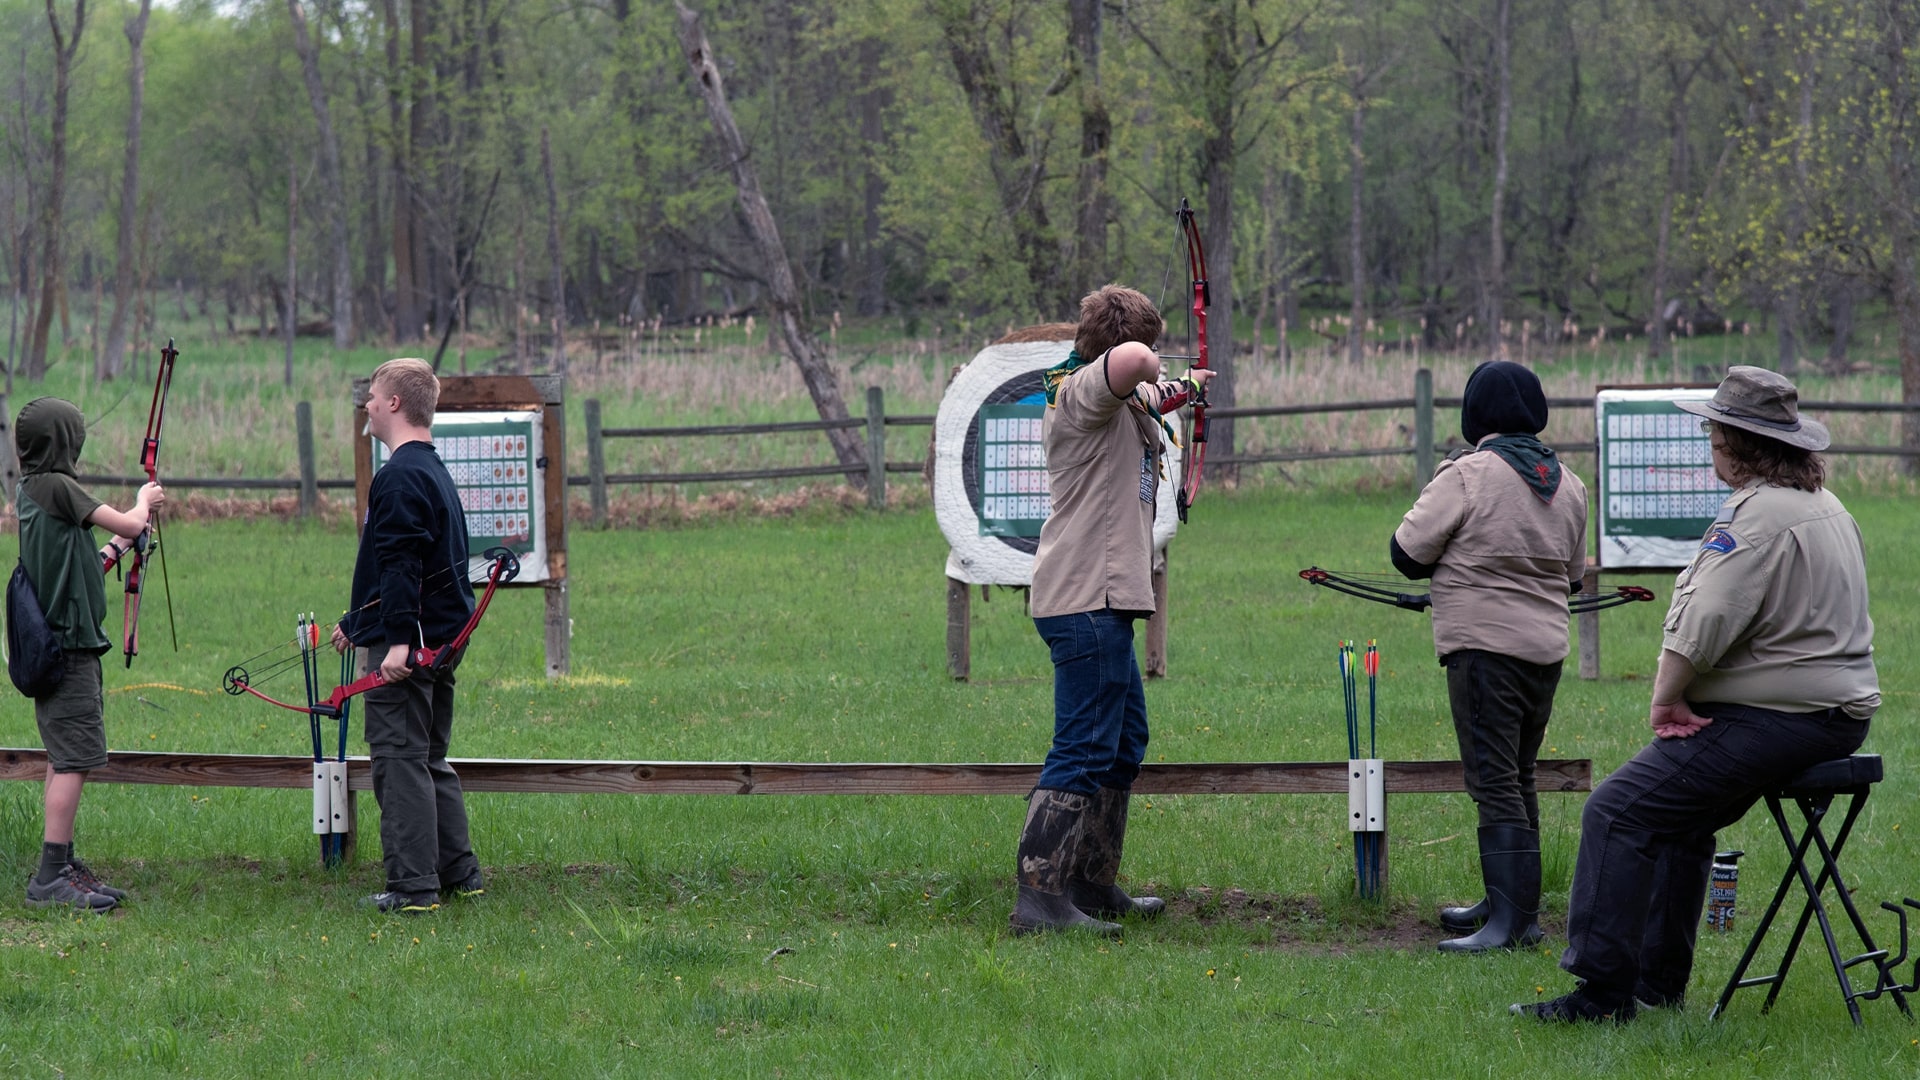 Four Scouts, 2 wearing Field (Class A) uniforms and two in casual clothes, are shooting arrows at the targets down-range while a staff member watches over them.